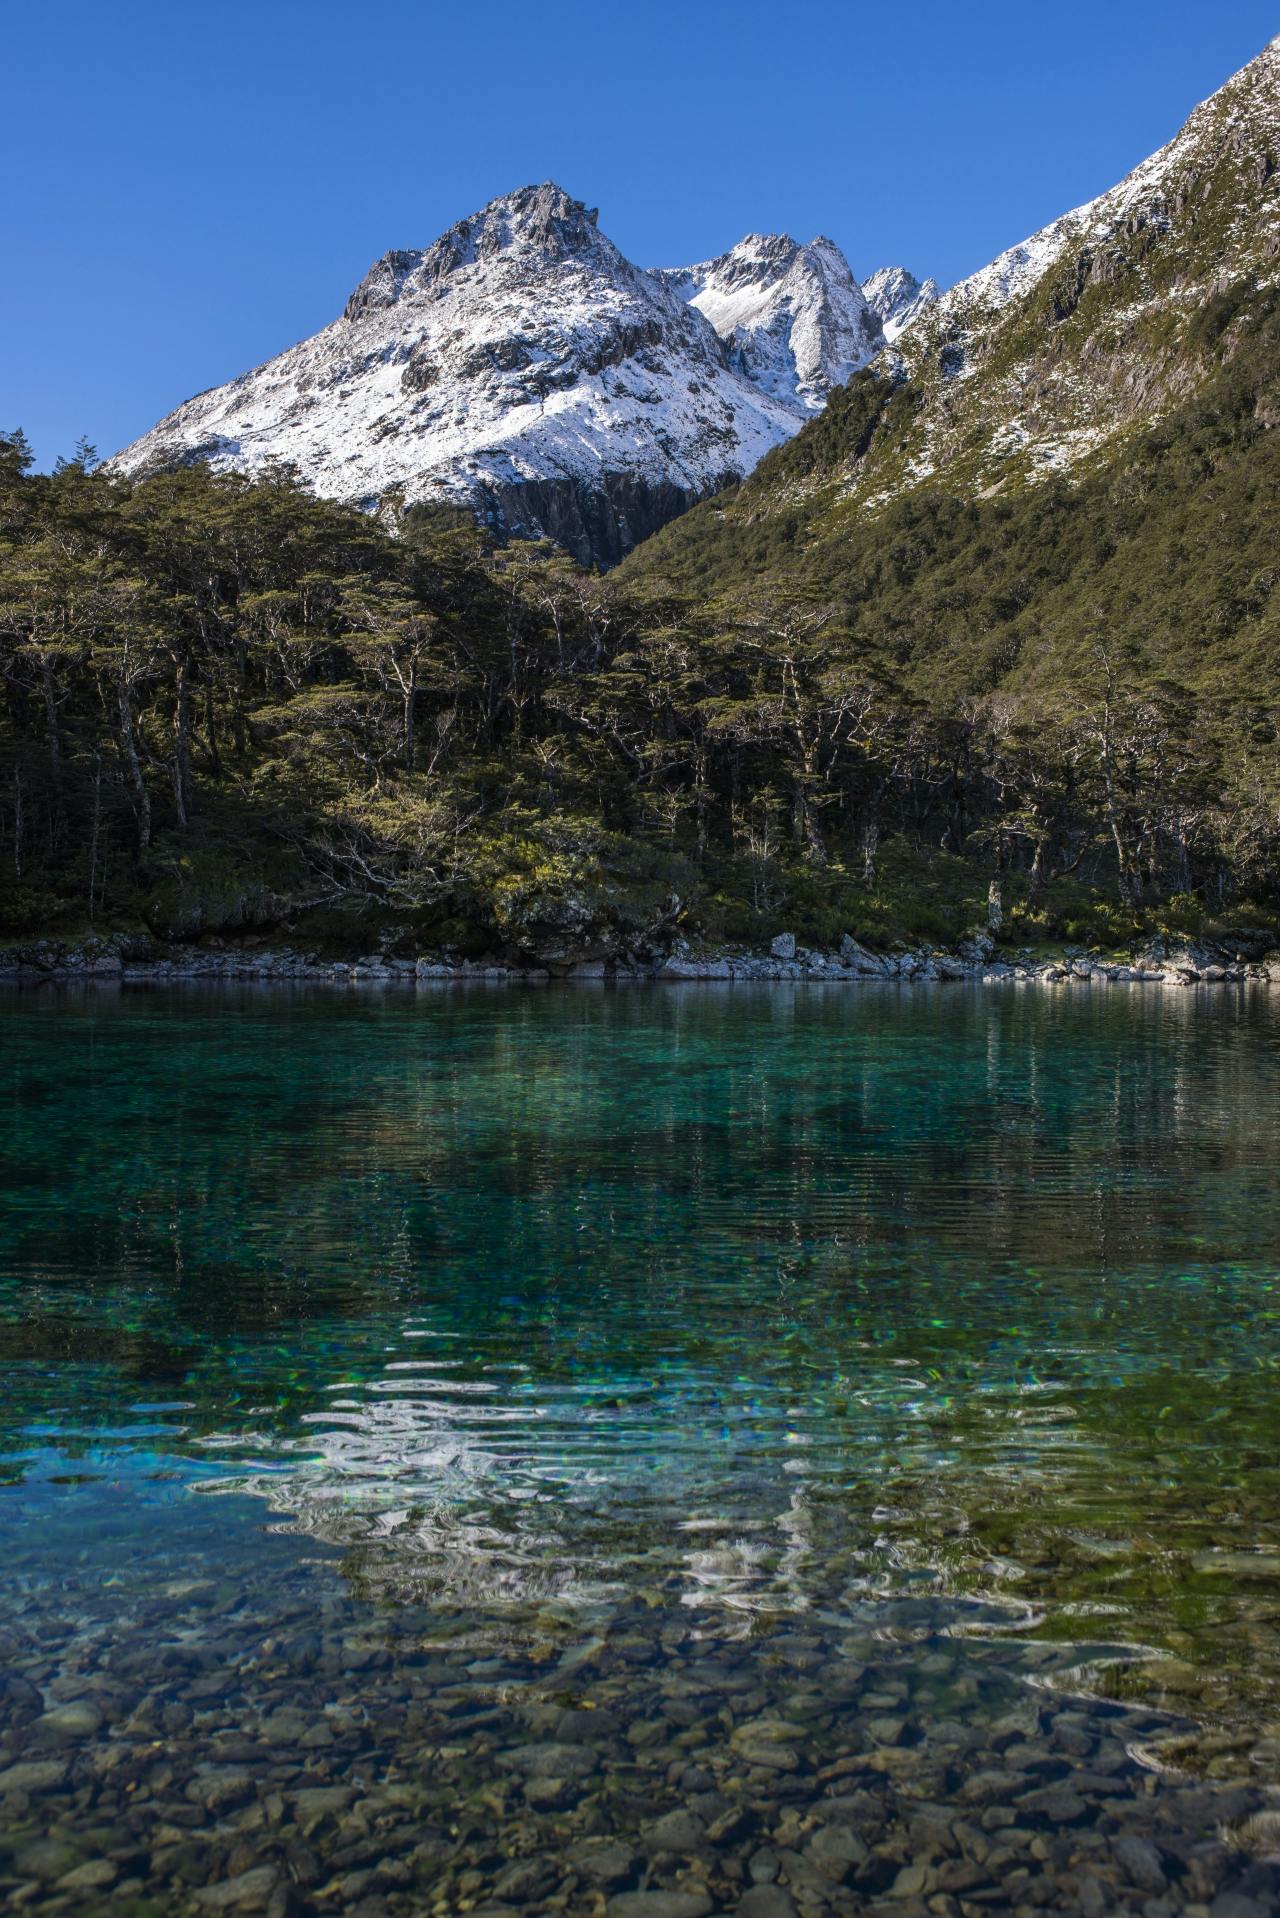 The crystal clear Blue Lake with Franklin Range beyond  